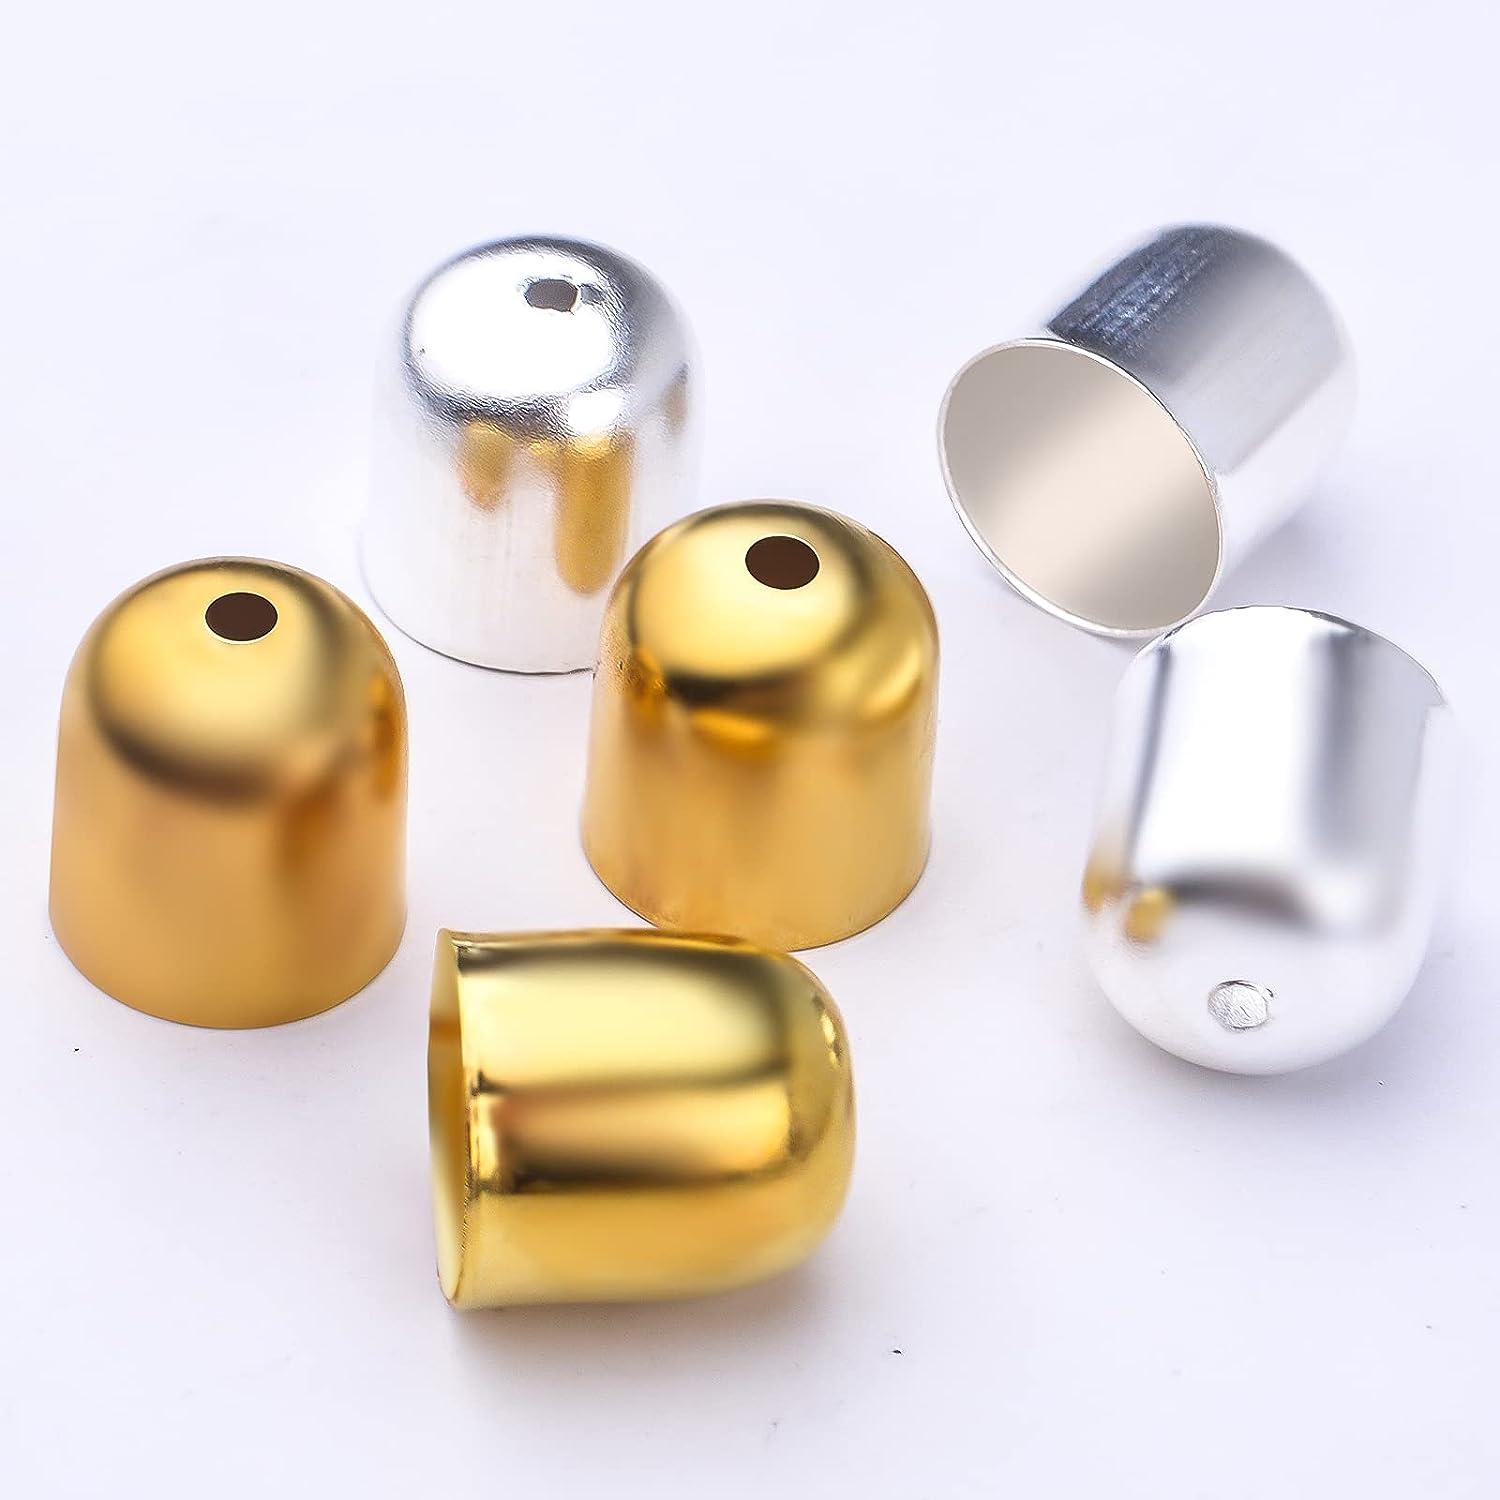 Aylifu 100 Pieces Glue in Barrel End Caps Brass Leather Cord Ends Tip Bead Caps Findings Kit for DIY Bracelet Necklace Pendant Tassel Crafts Jewelry